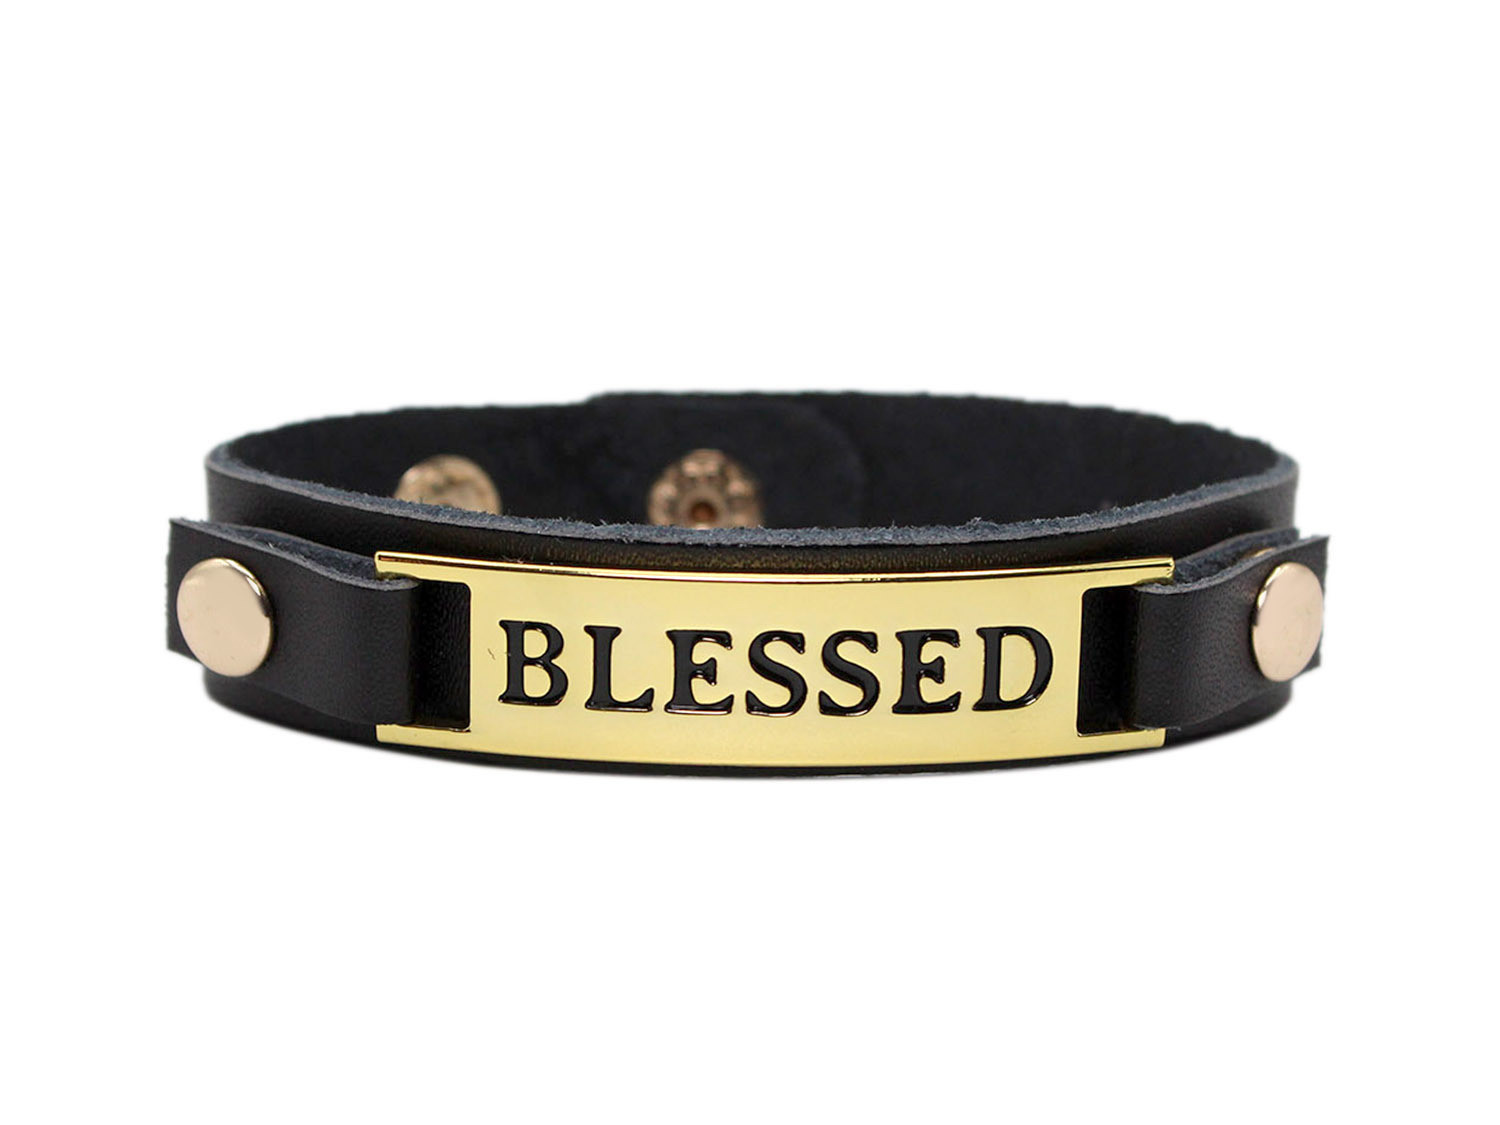 Metropolitan Cuff with Metal Plaque "Blessed"